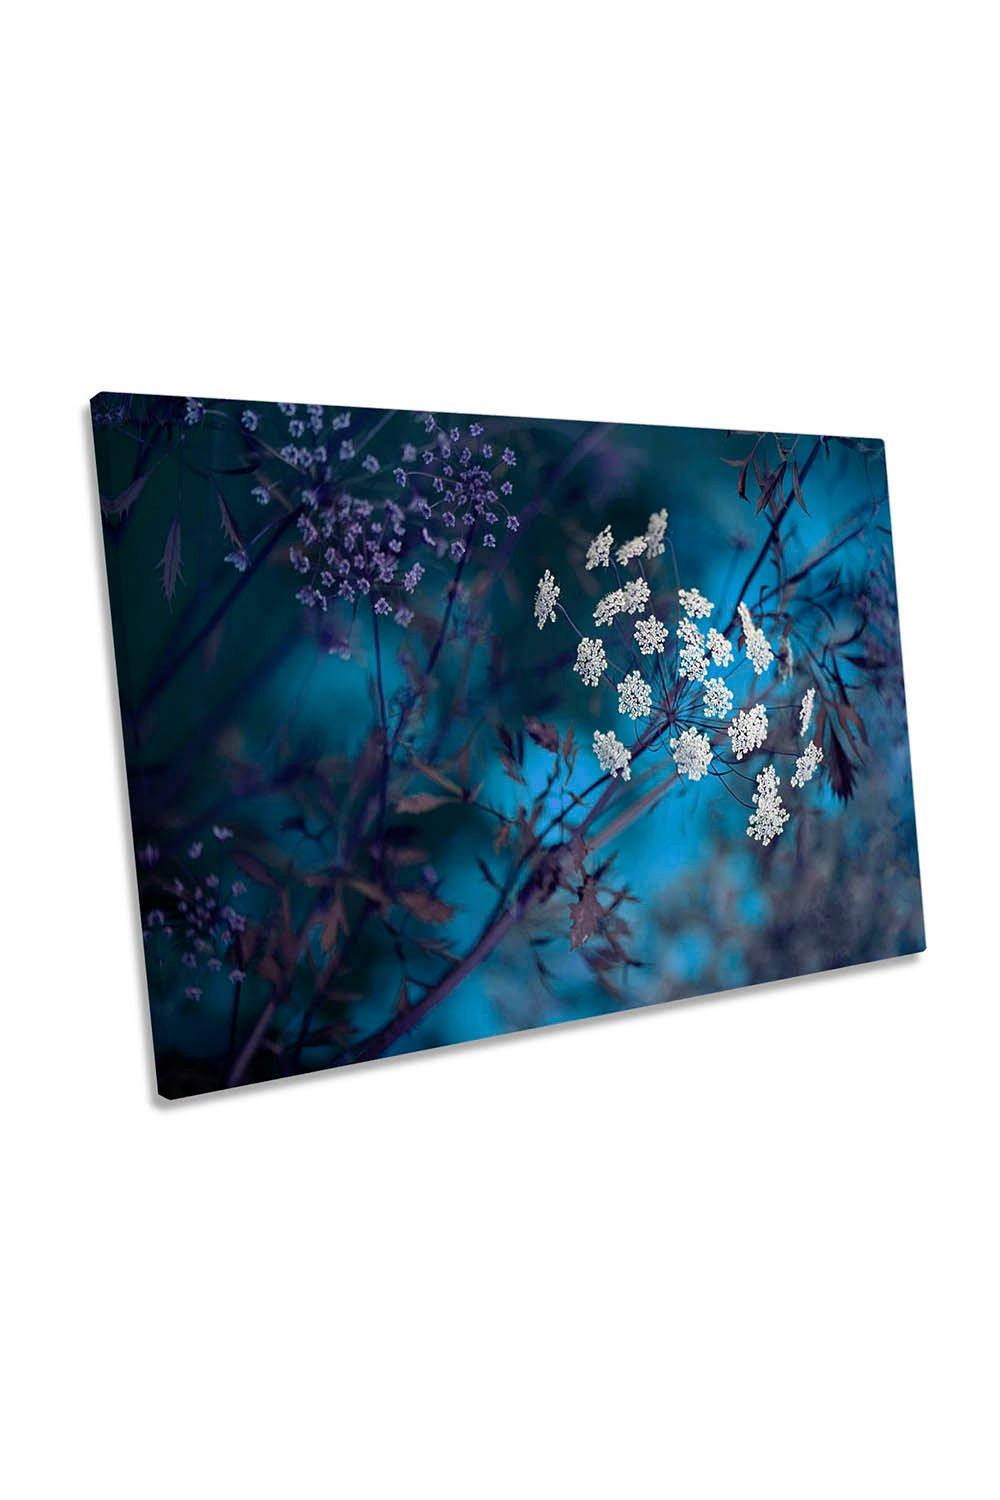 Queen Anne's Lace Blue Floral Flowers Canvas Wall Art Picture Print